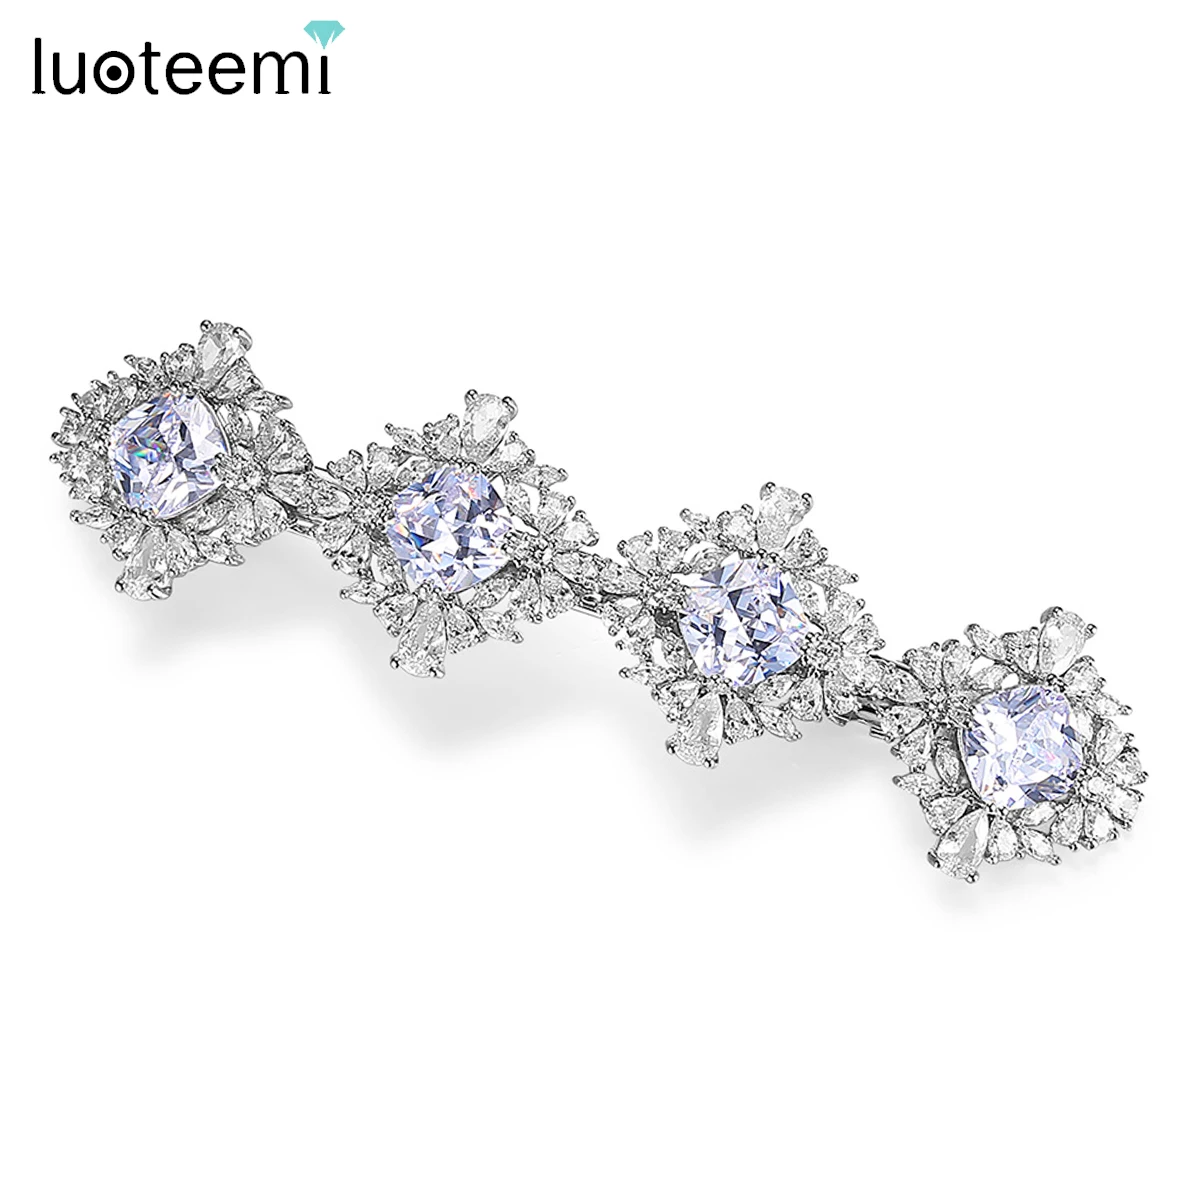 

LUOTEEMI Korean Fashion Shinny Cubic Zircons Hair Clips for Women Square Crystals Wedding Bridal Stunning Jewelry Christmas Gift